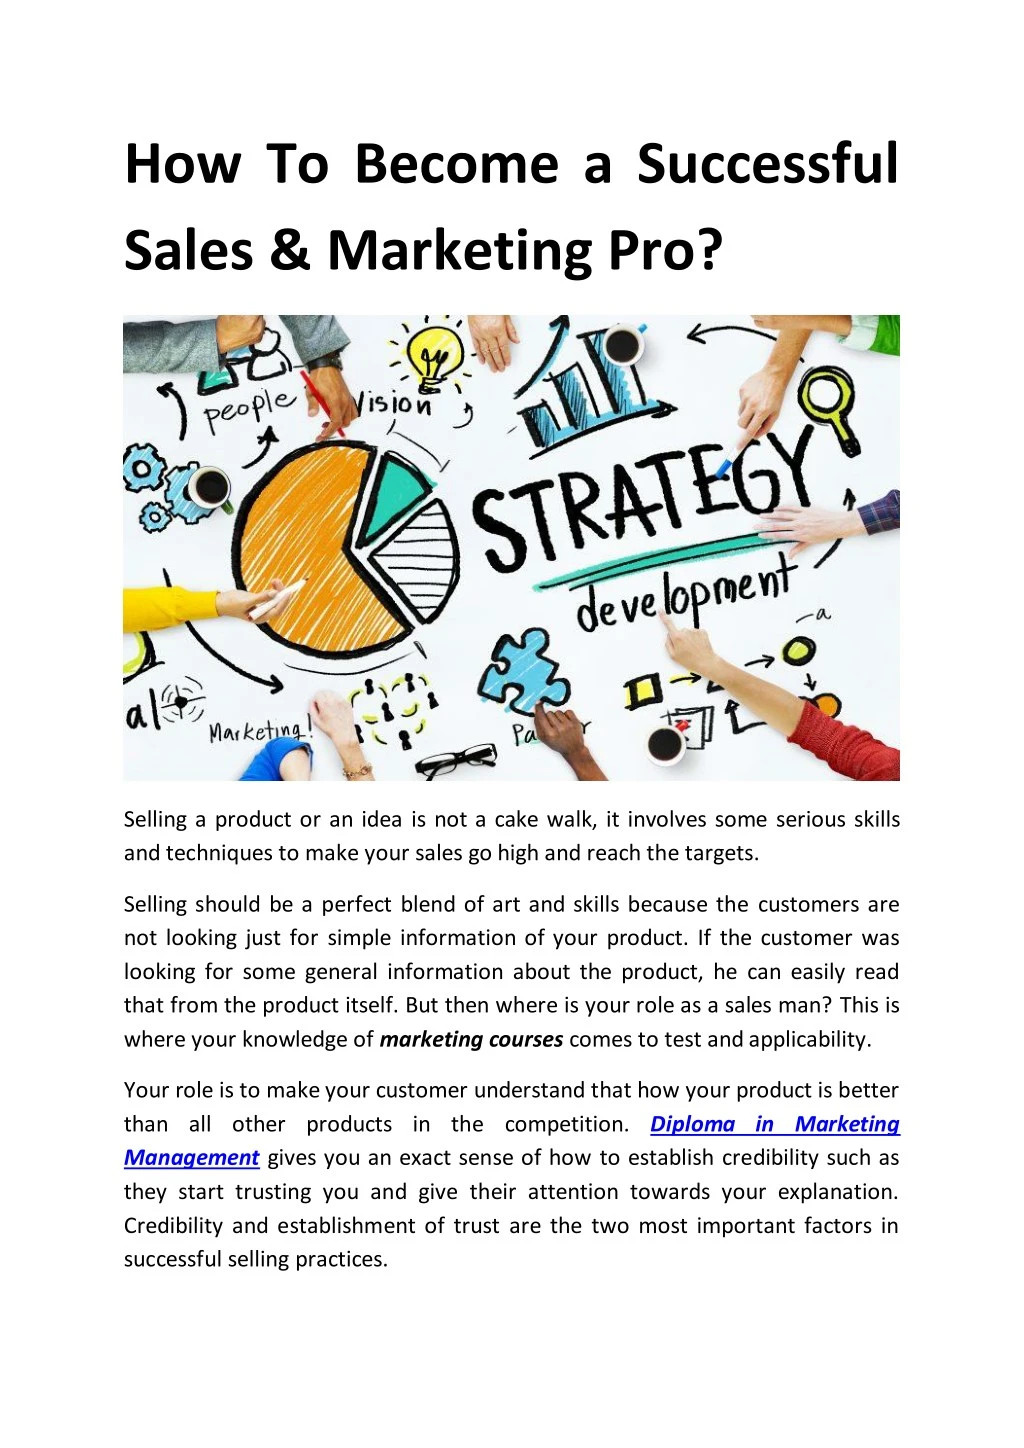 how to become a successful sales marketing pro